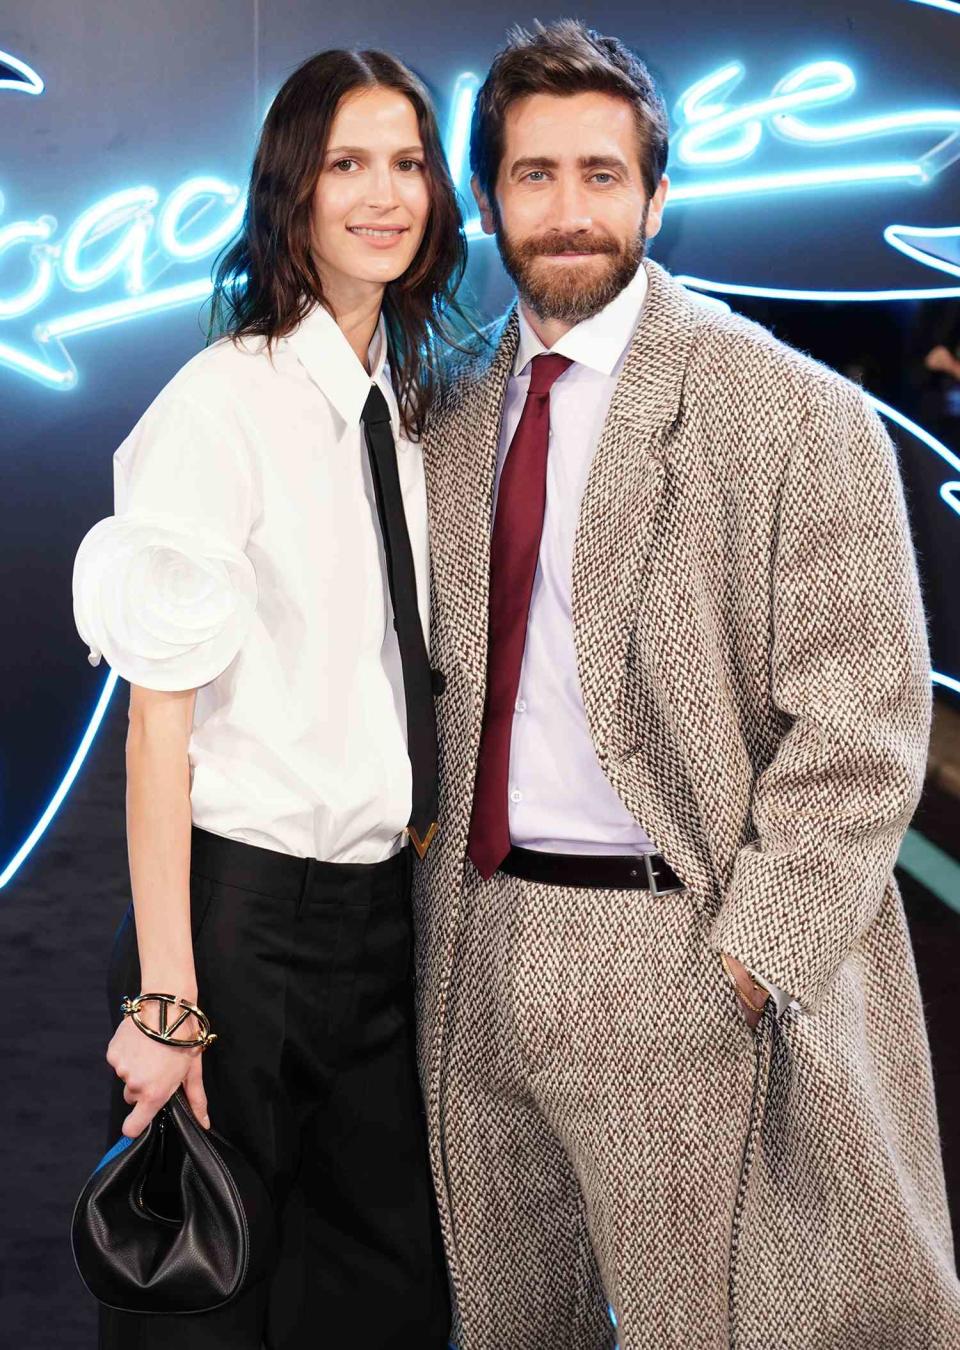 <p>Ian West/PA Images via Getty Images</p> Jeanne Cadieu and Jake Gyllenhaal attend a screening of <em>Road House</em> in London on March 14, 2024